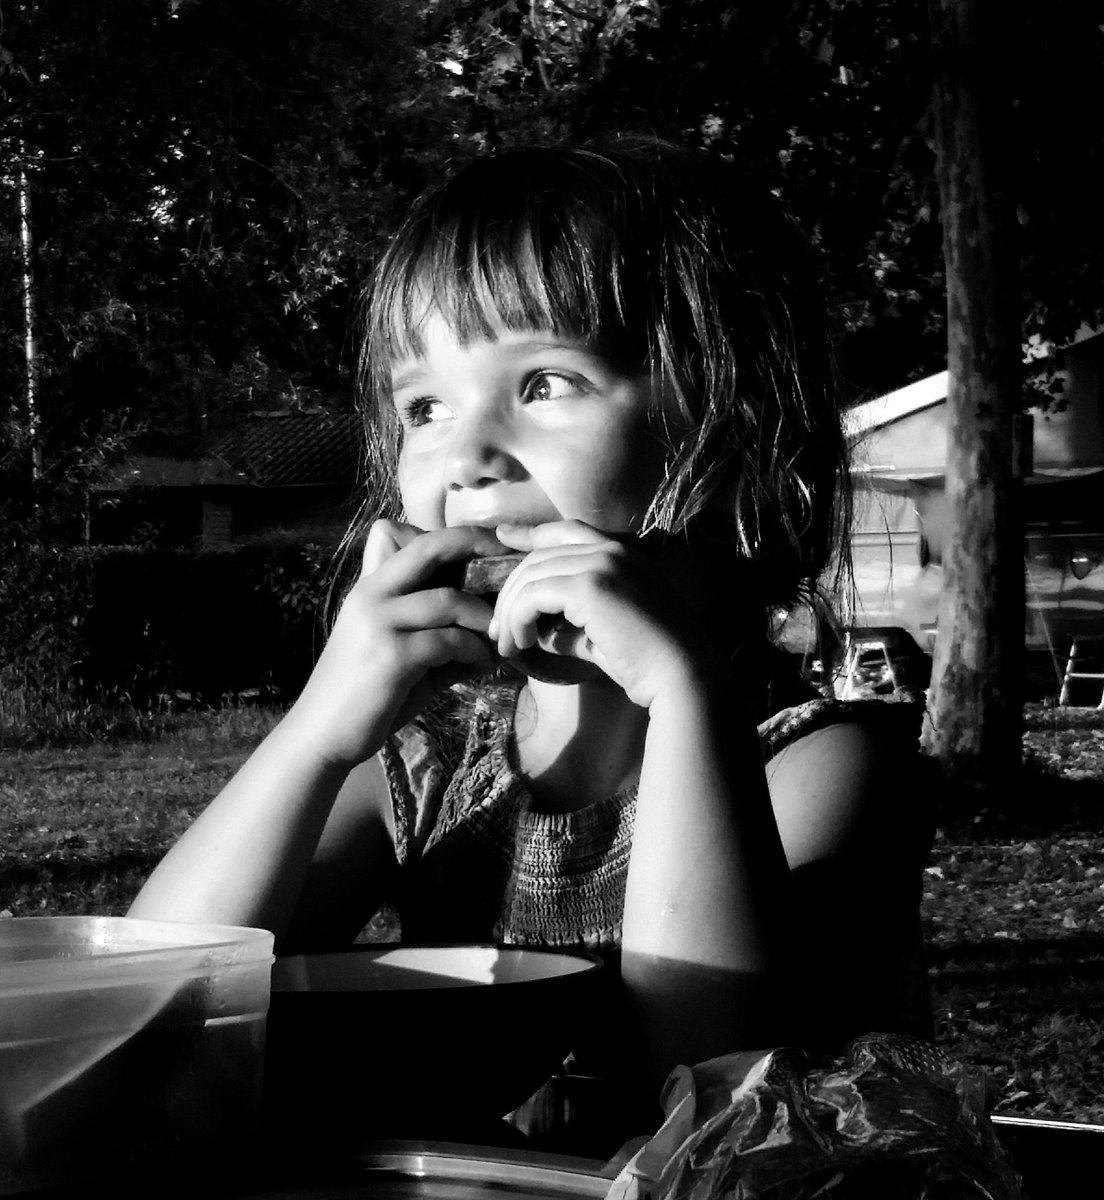 Adverto - To observe #Gallery365in2024DailyPrompt #Gallery365in2024 ⁦@Gallery365photo⁩
Munching a watermelon is not enough to stop this one from keeping an eye on everything... (old archive photo)